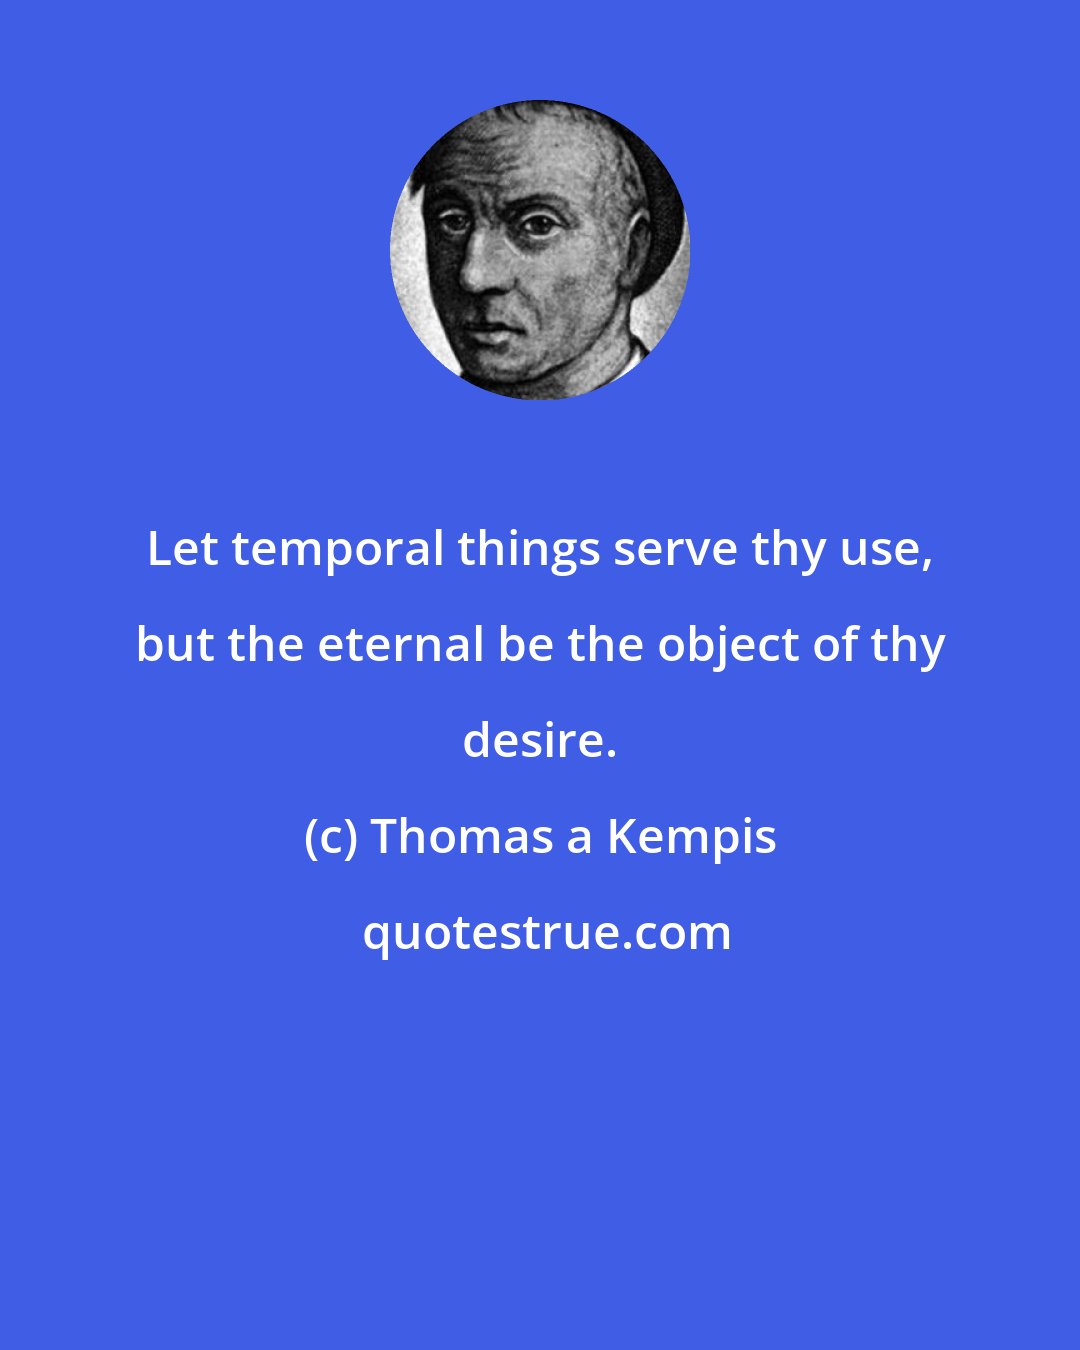 Thomas a Kempis: Let temporal things serve thy use, but the eternal be the object of thy desire.